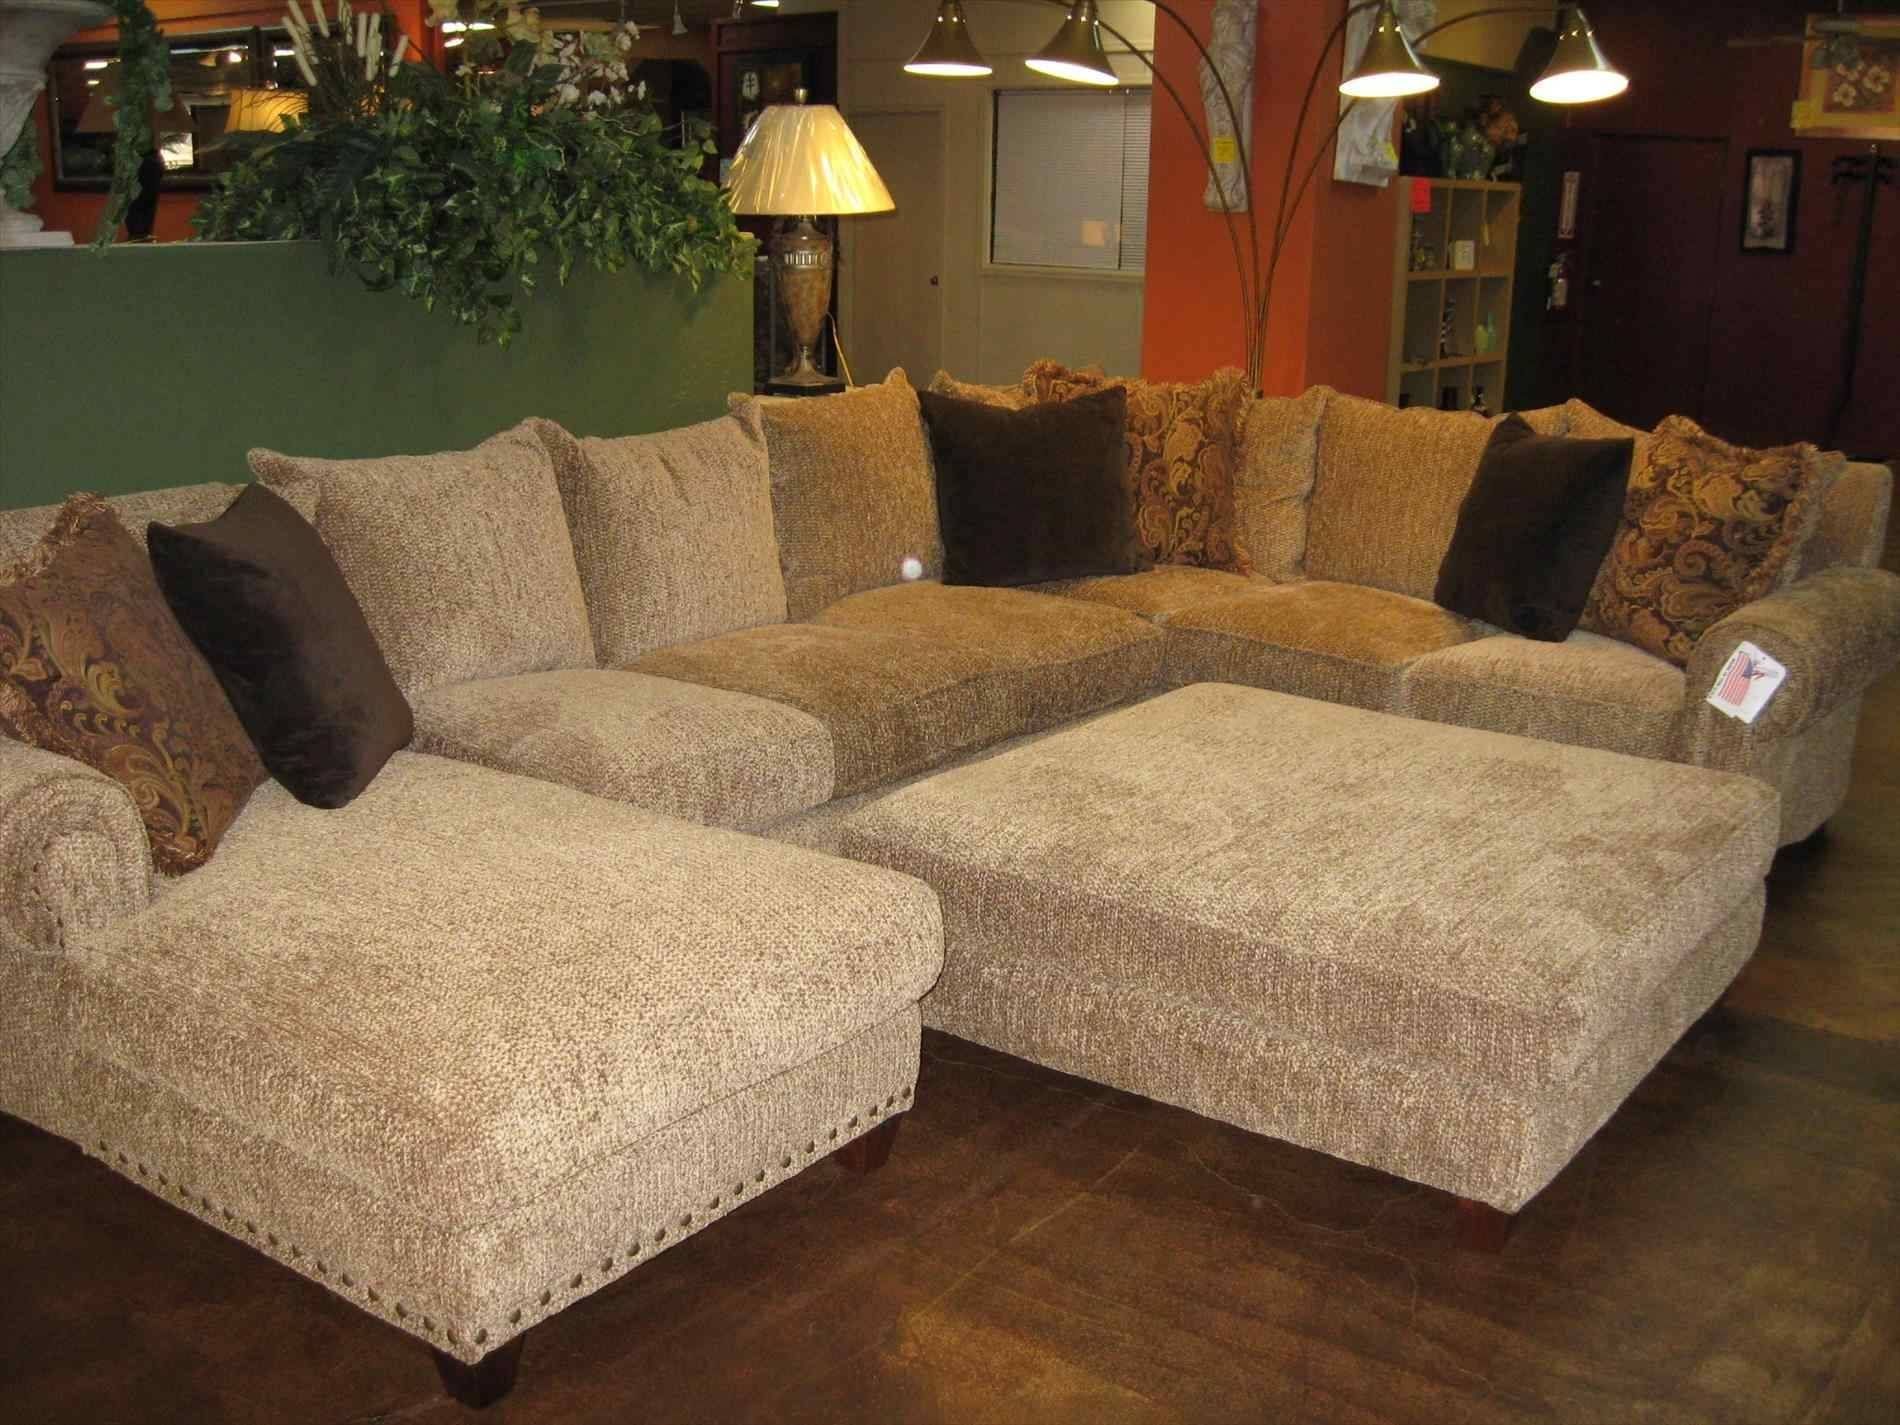 Sofa Wayfair The Most Popular Long With Chaise In The Down Filled Within Down Filled Sofas And Sectionals (View 10 of 30)